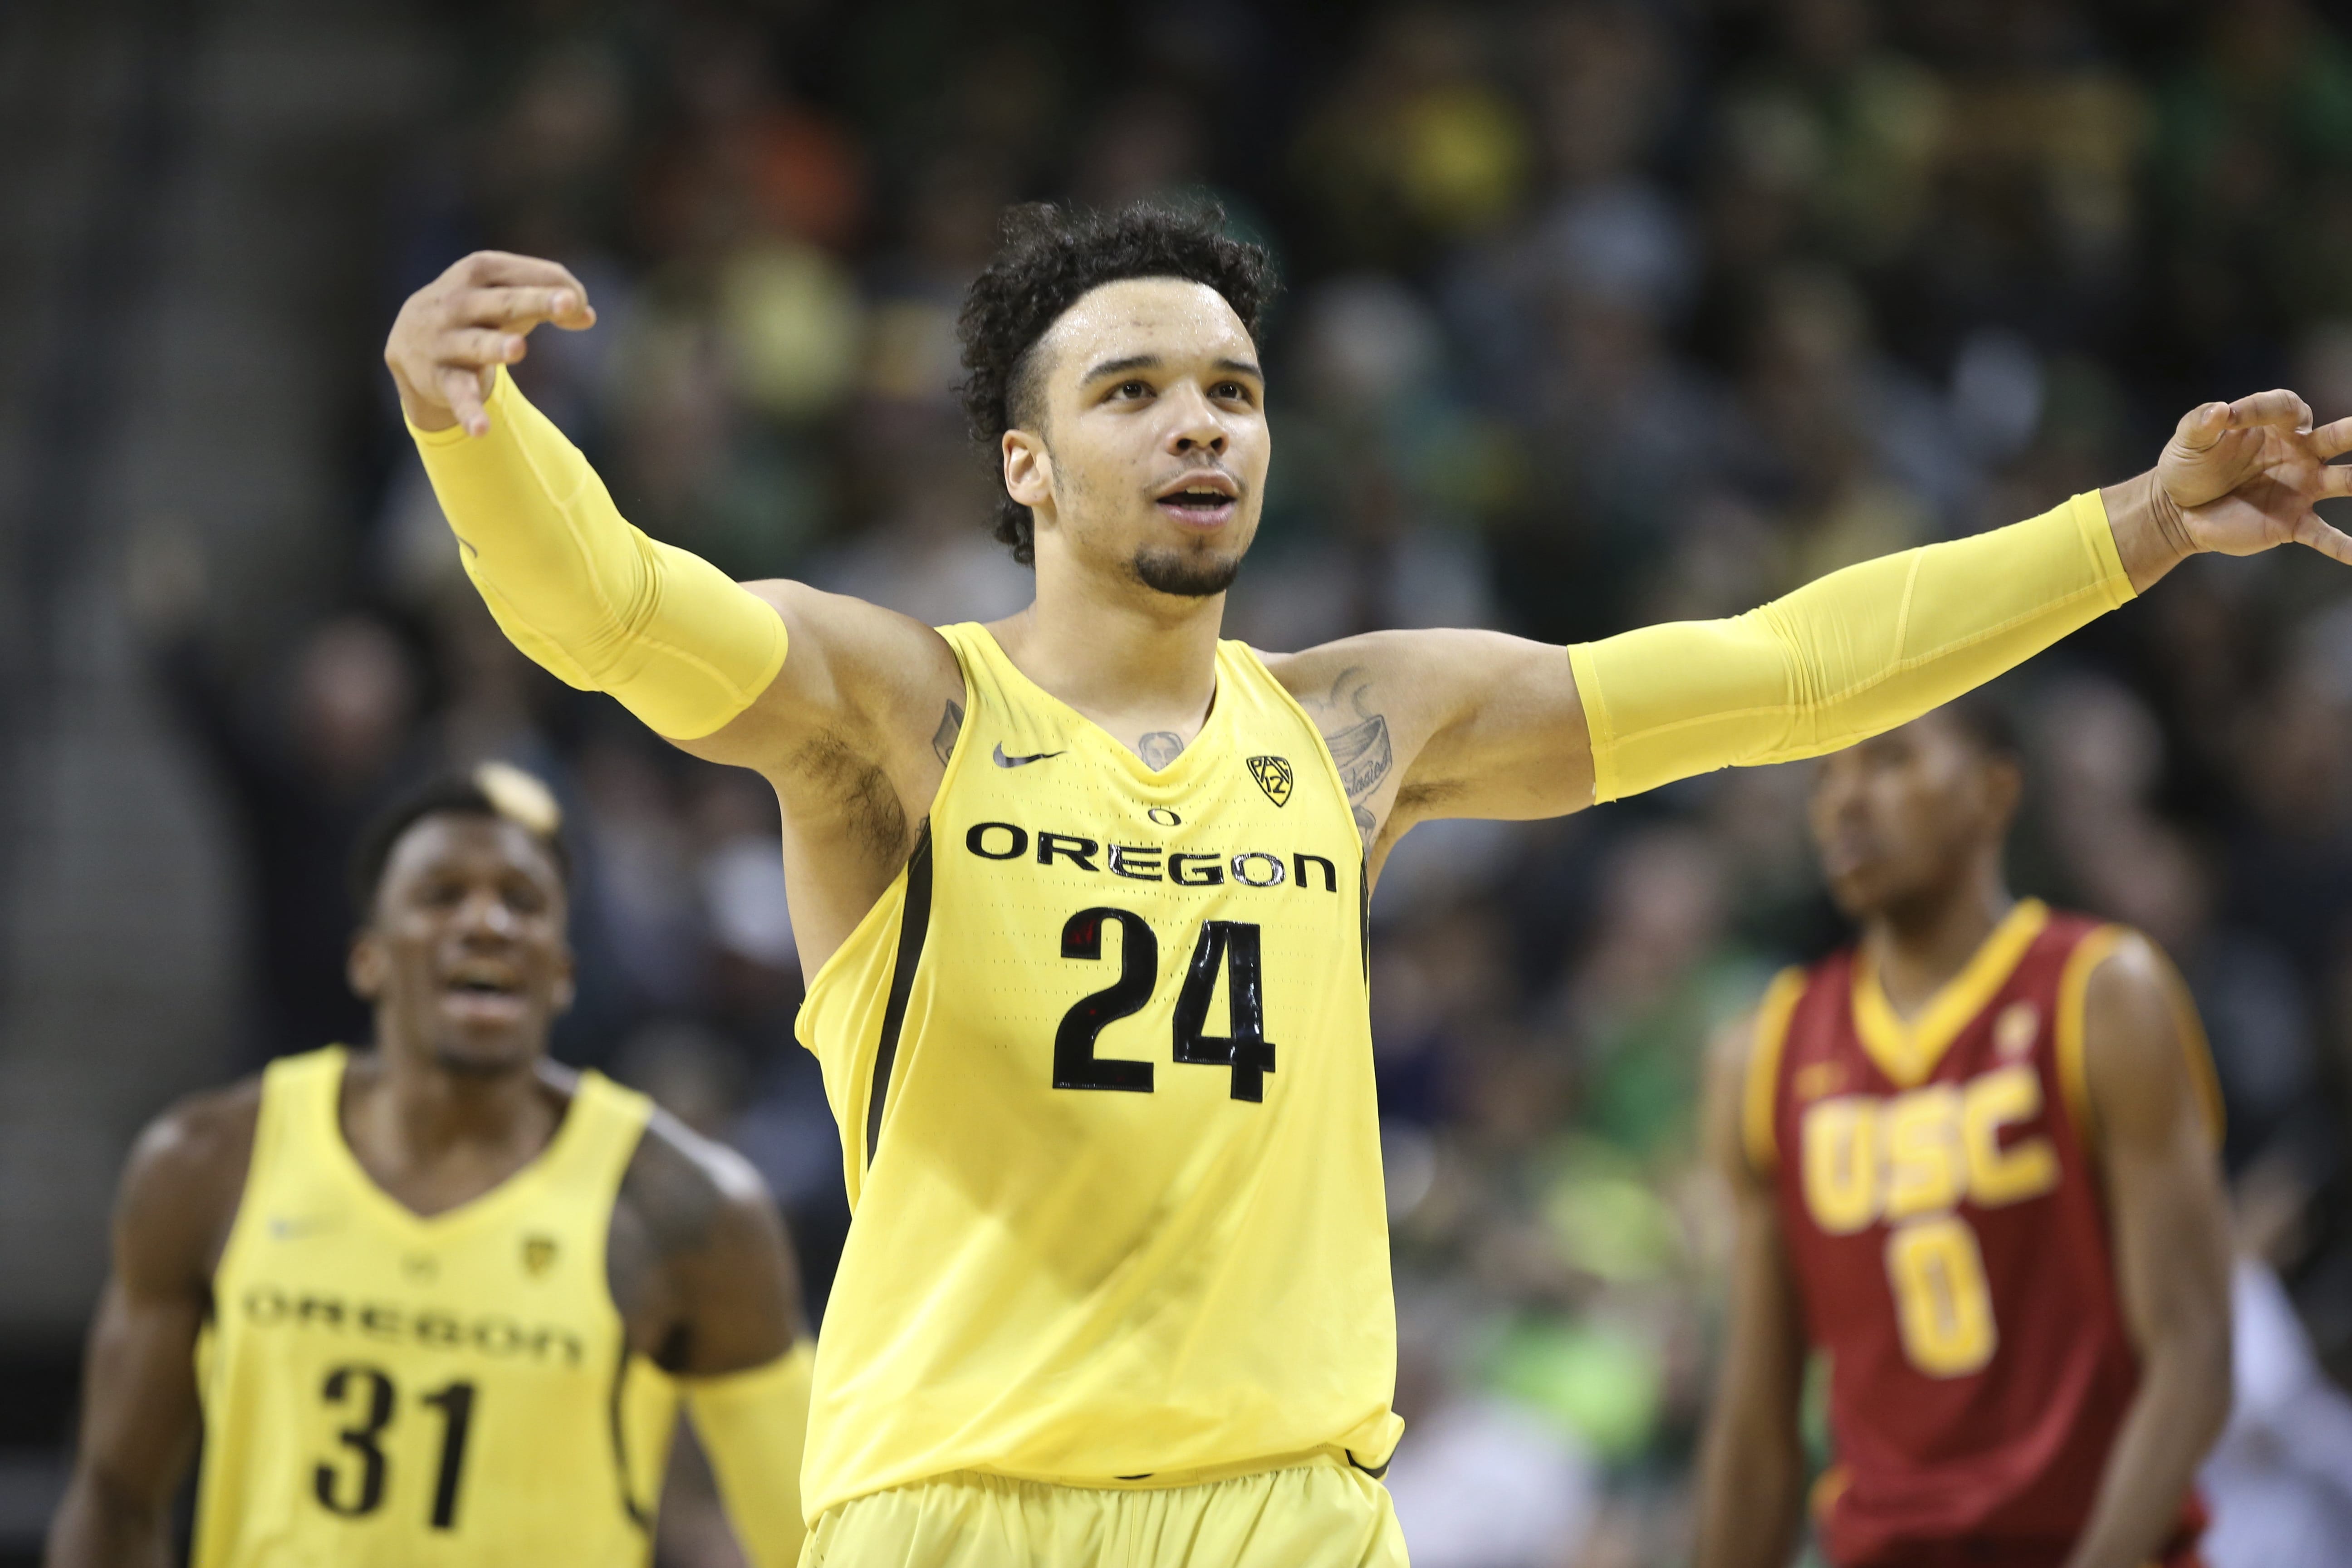 Oregon's Dillon Brooks, center, celebrates after scoring against Southern California during the second half of an NCAA college basketball game Friday, Dec. 30, 2016, in Eugene, Ore.